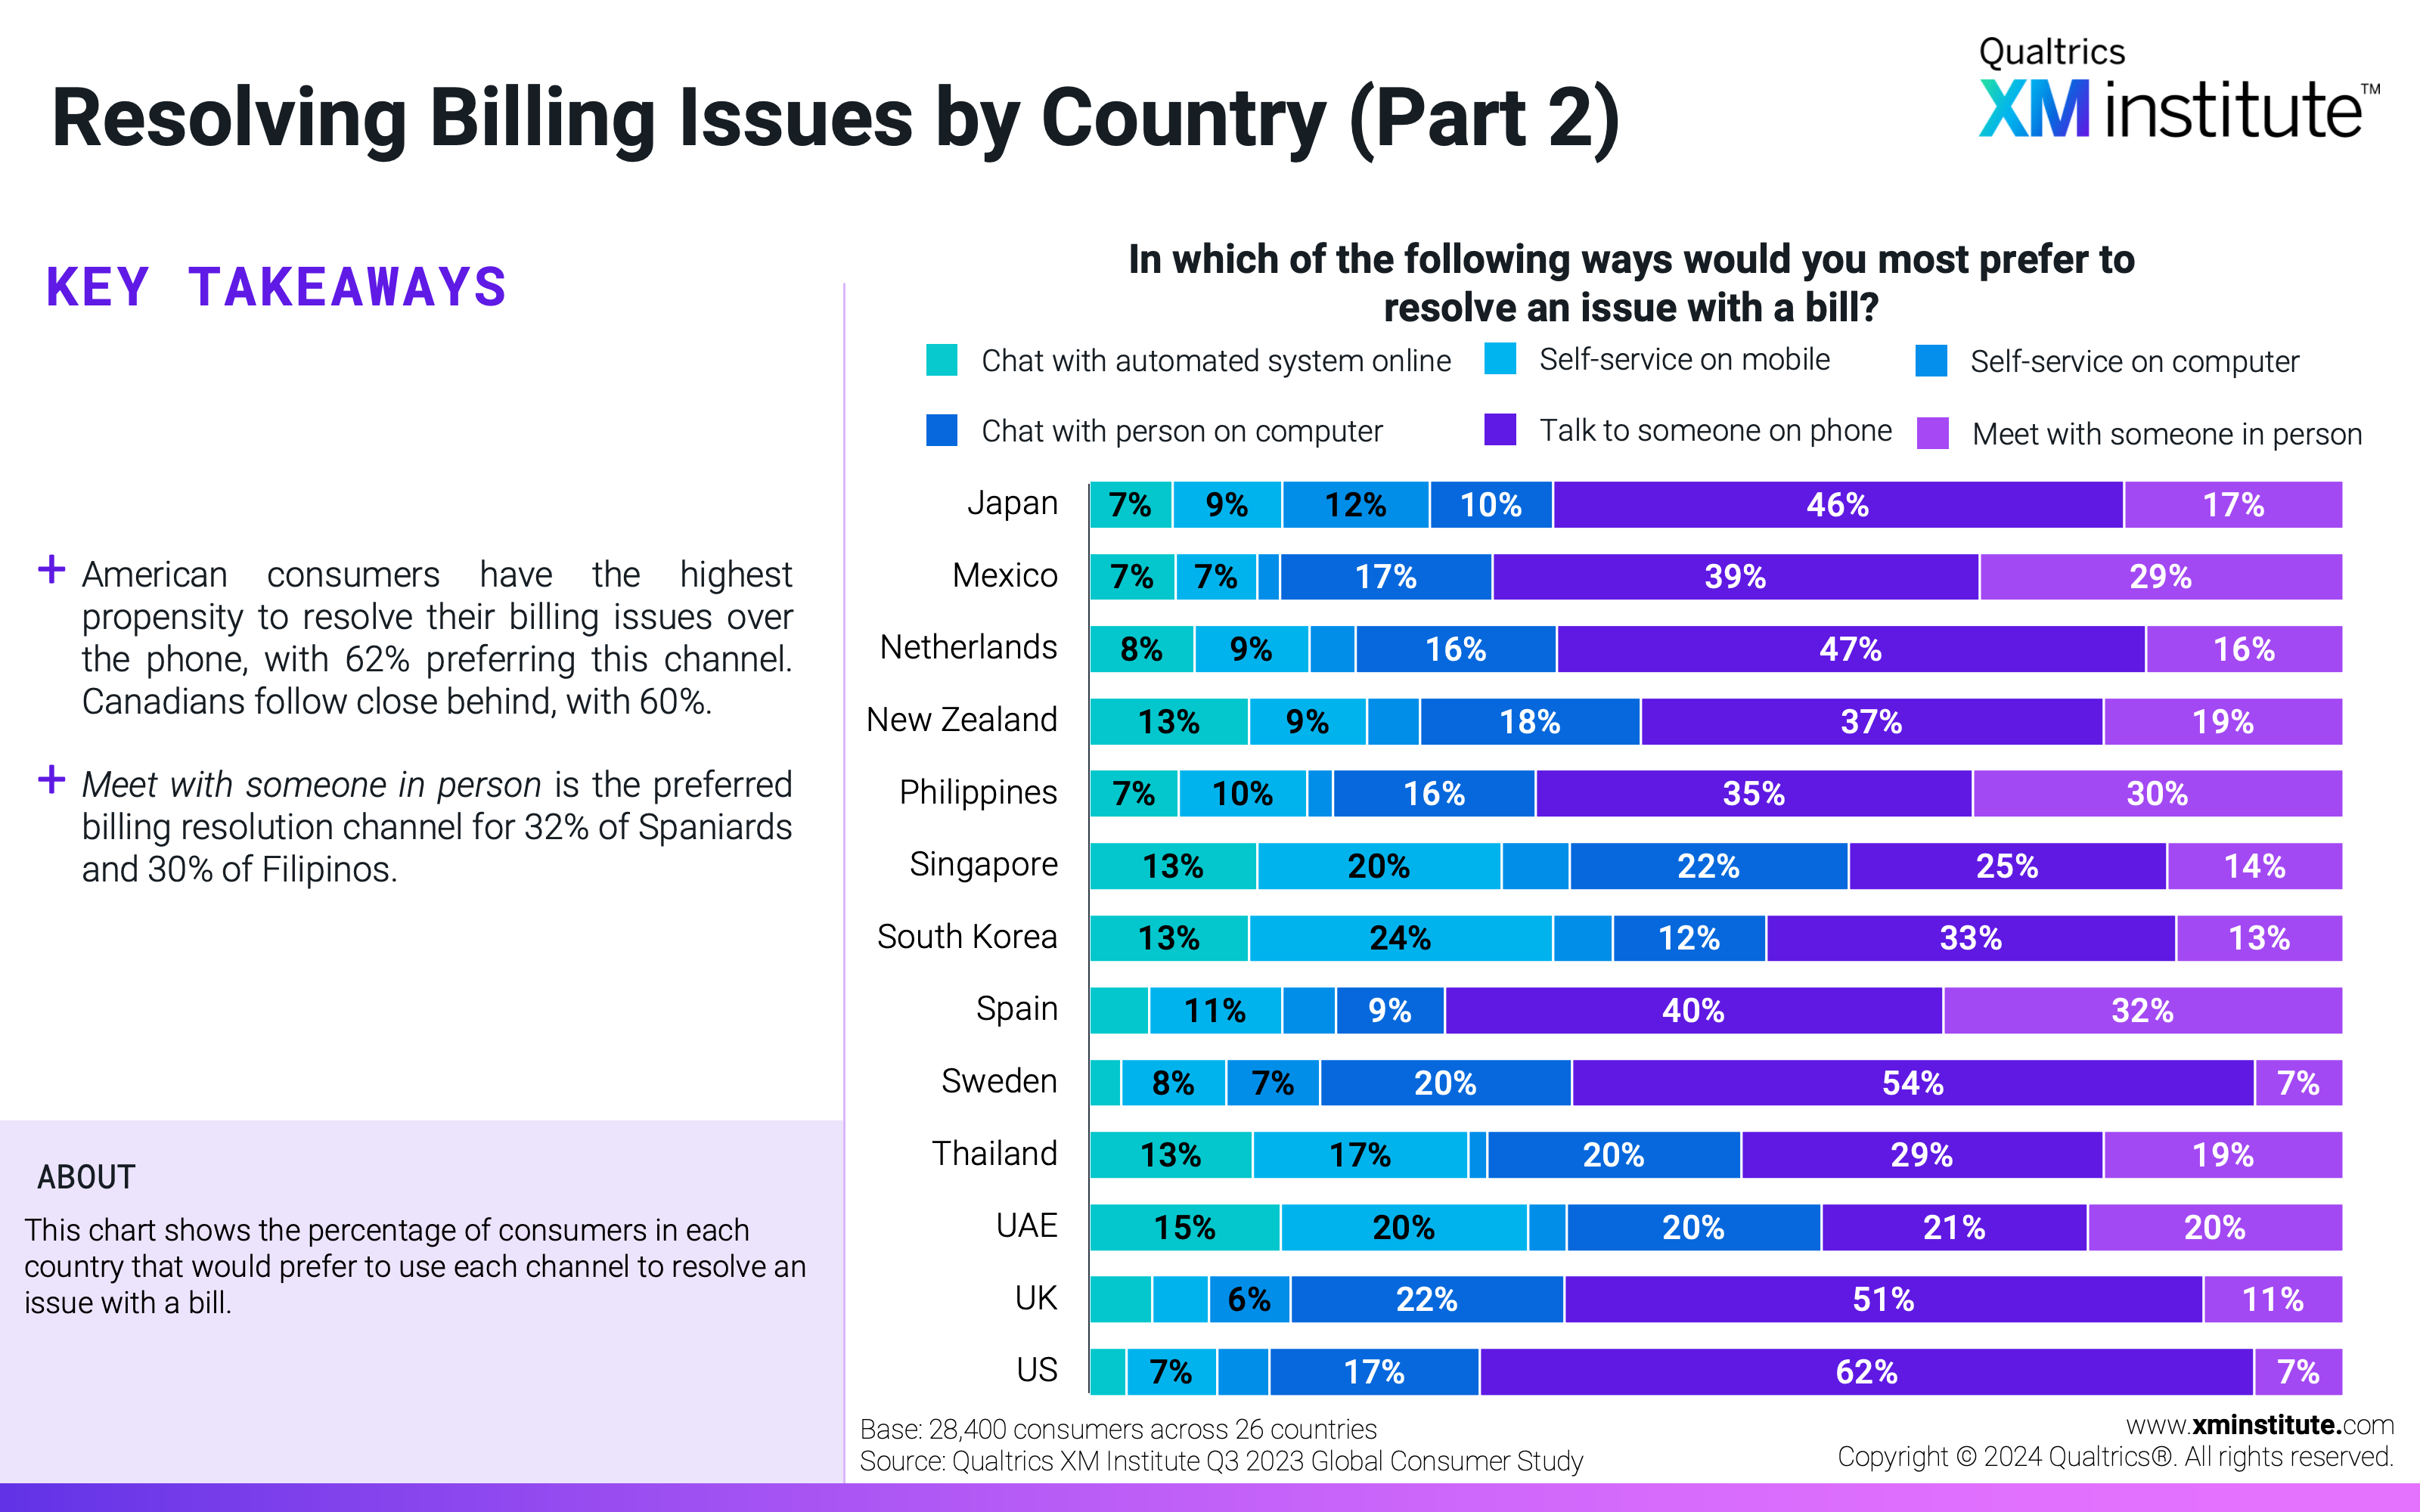 This chart shows the percentage of consumers in each country that would prefer to use each channel to resolve an issue with a bill. 